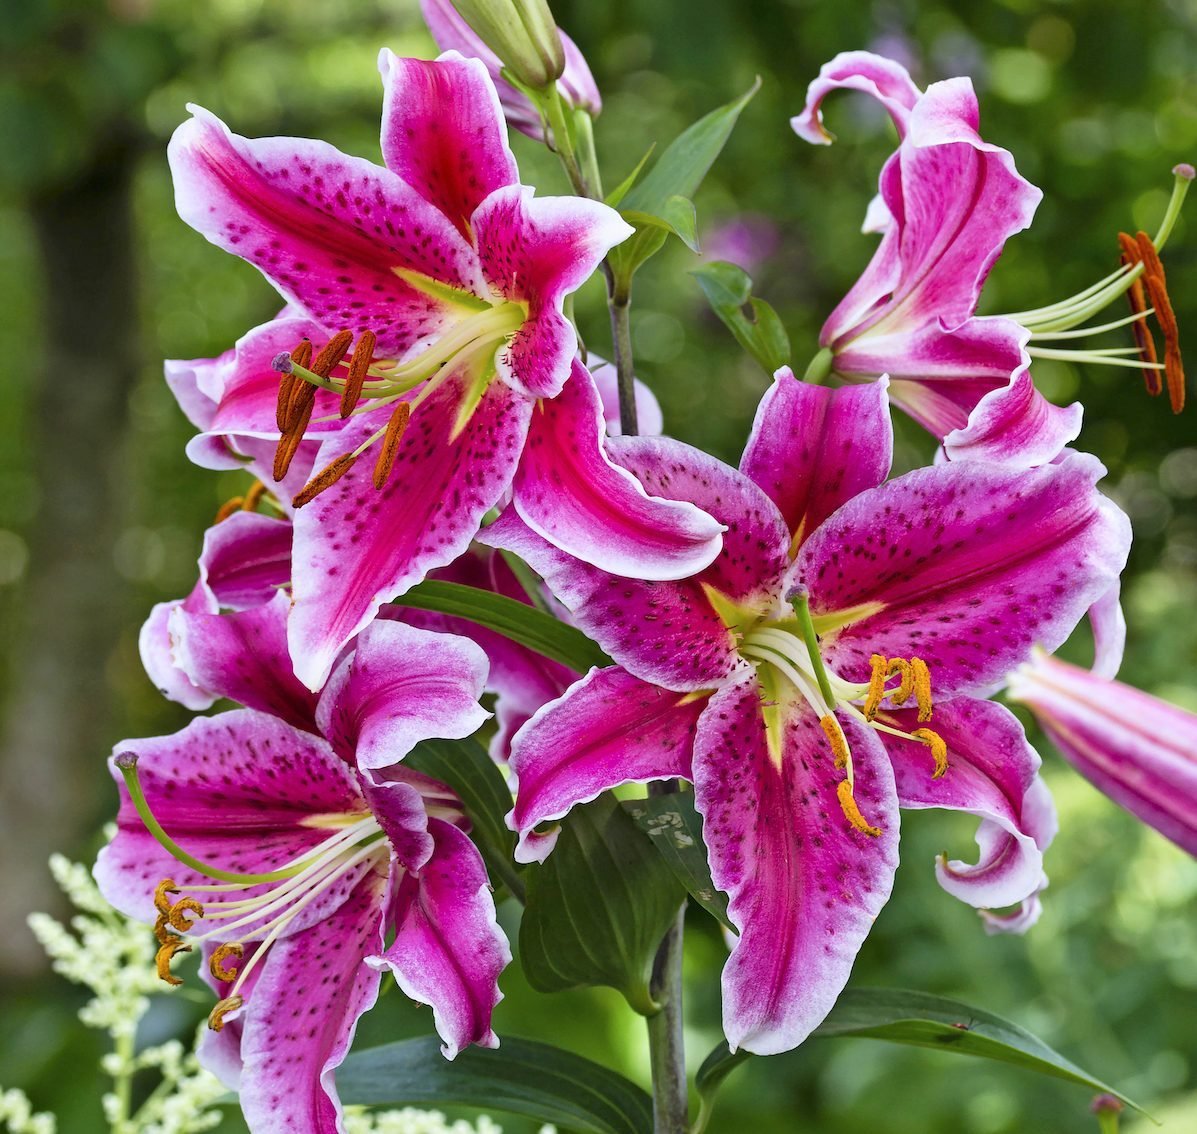 True Lily vs Daylily: What's the Difference?